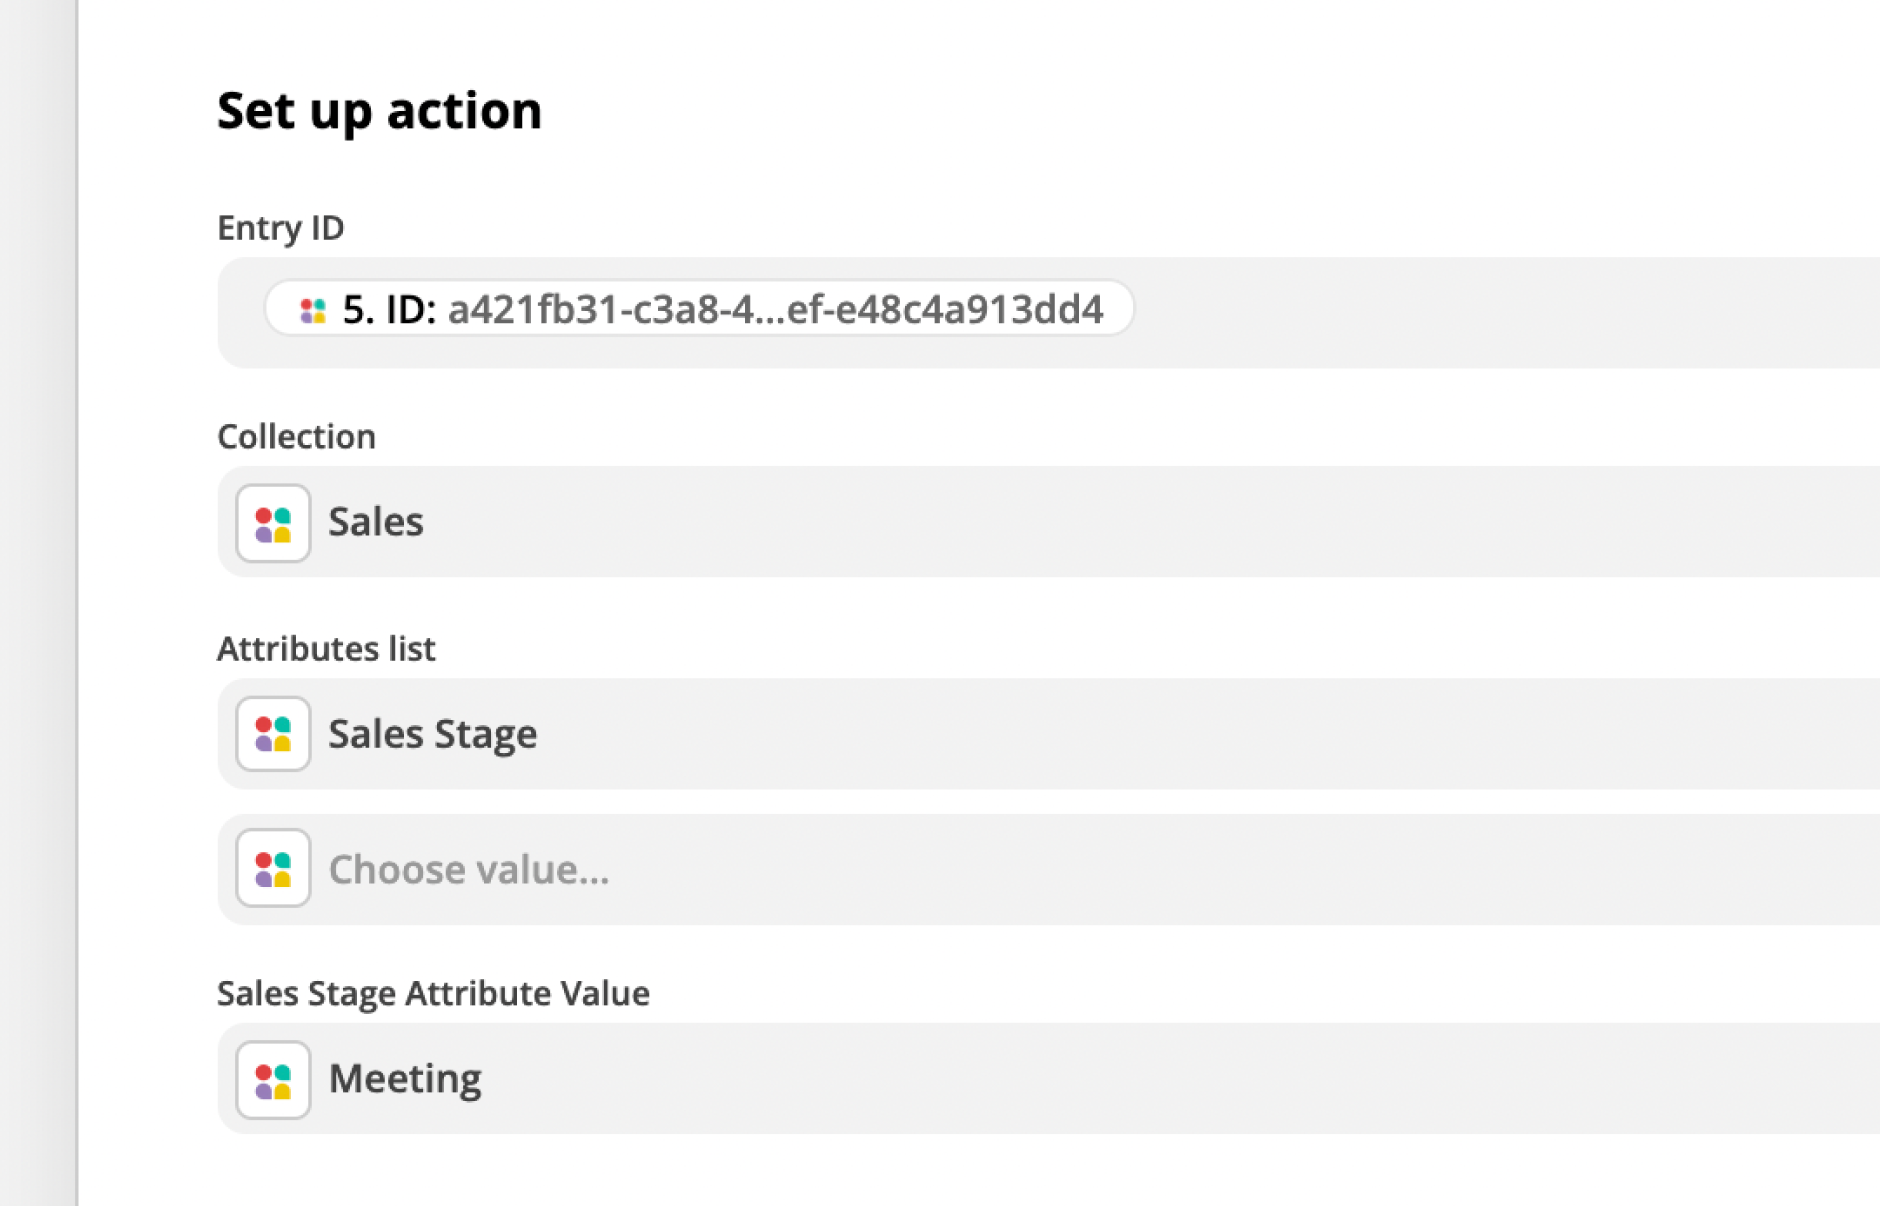 The Set up action window in Zapier. These completed fields tell Zapier which collection to create an entry in (Sales) and which kanban stage (Meeting) to move them to.